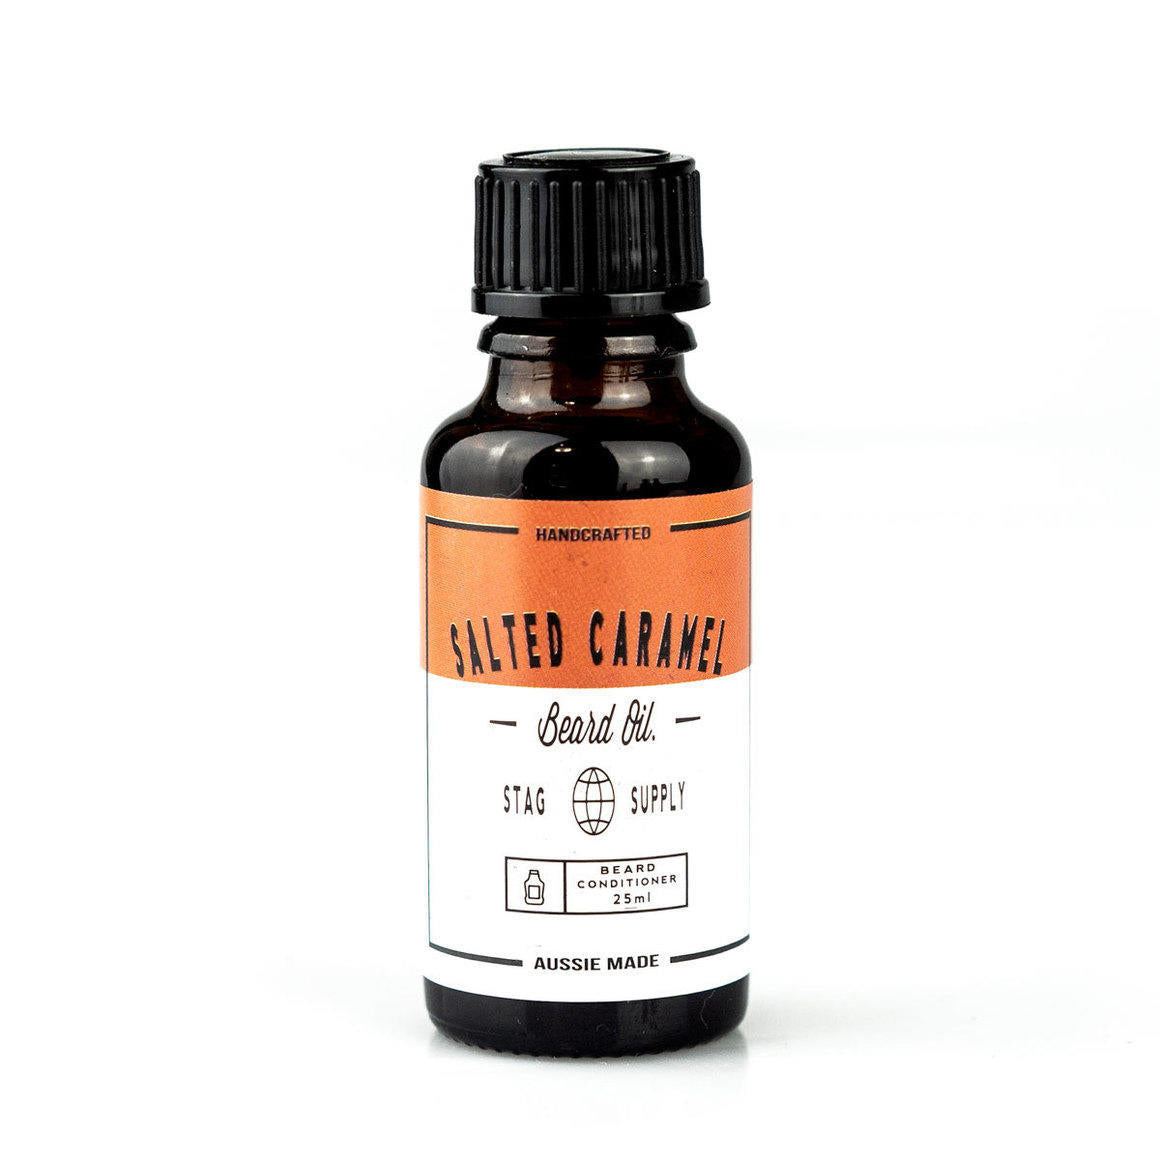 Stag Supply Salted Carmel Beard Oil, perfect for birthday gift ideas for him in Melbourne.